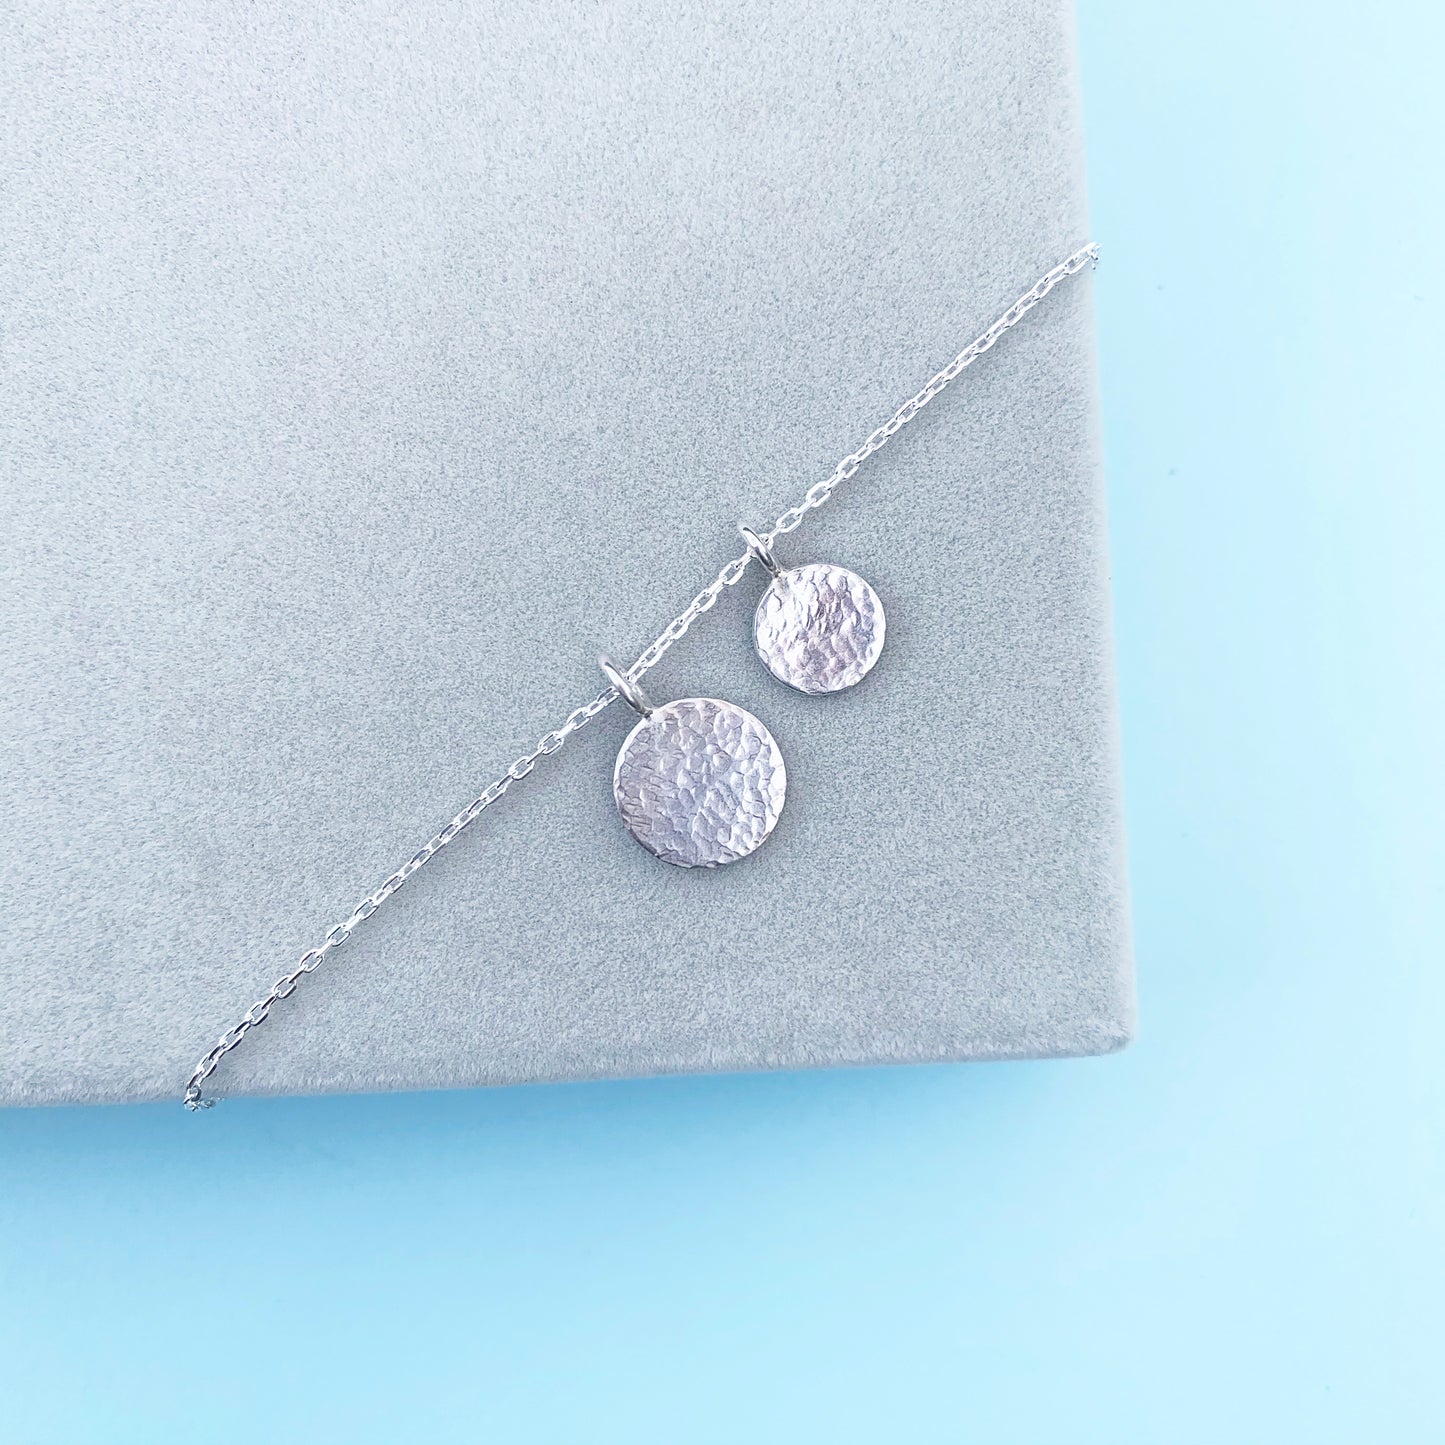  small silver ripple pendant necklace, polished ripple pendant, silver pendant, silver necklace, sterling silver necklace, silver ripple pendant necklace, small ripple pendant